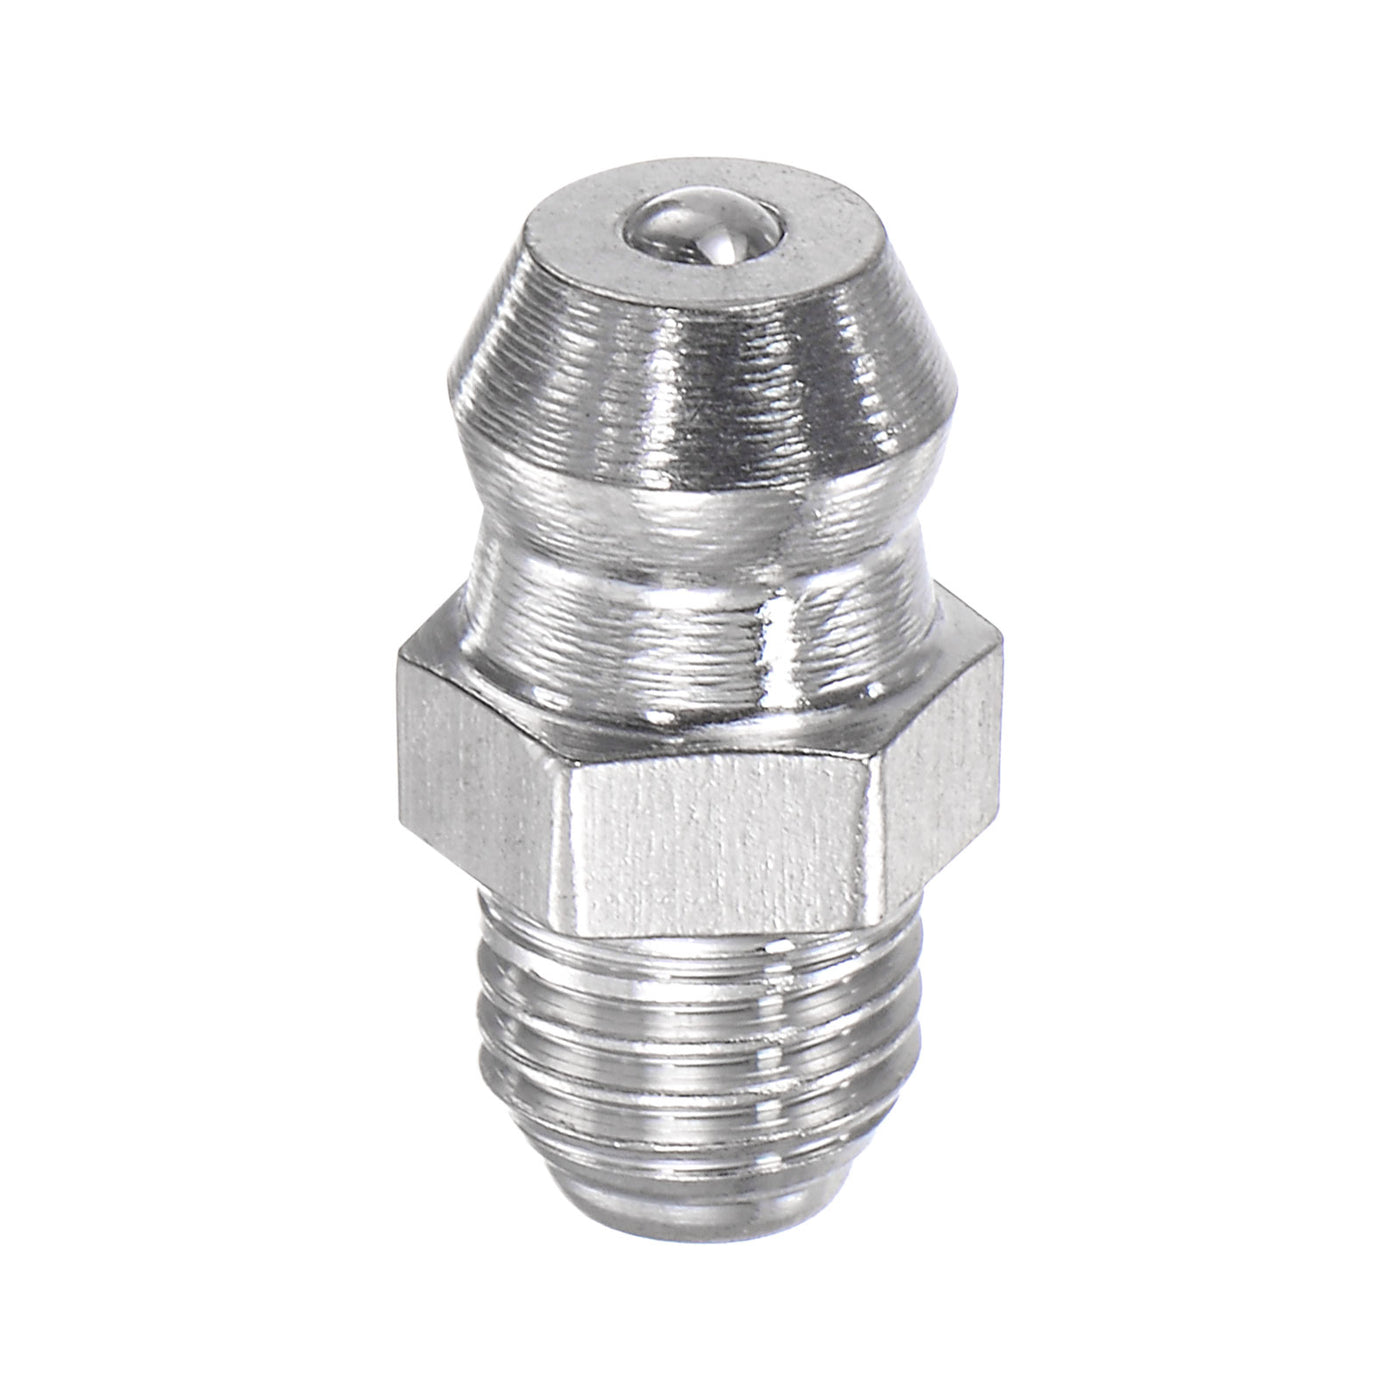 uxcell Uxcell Metric Stainless Steel Straight Hydraulic Grease Fitting M6 x 0.75mm Thread